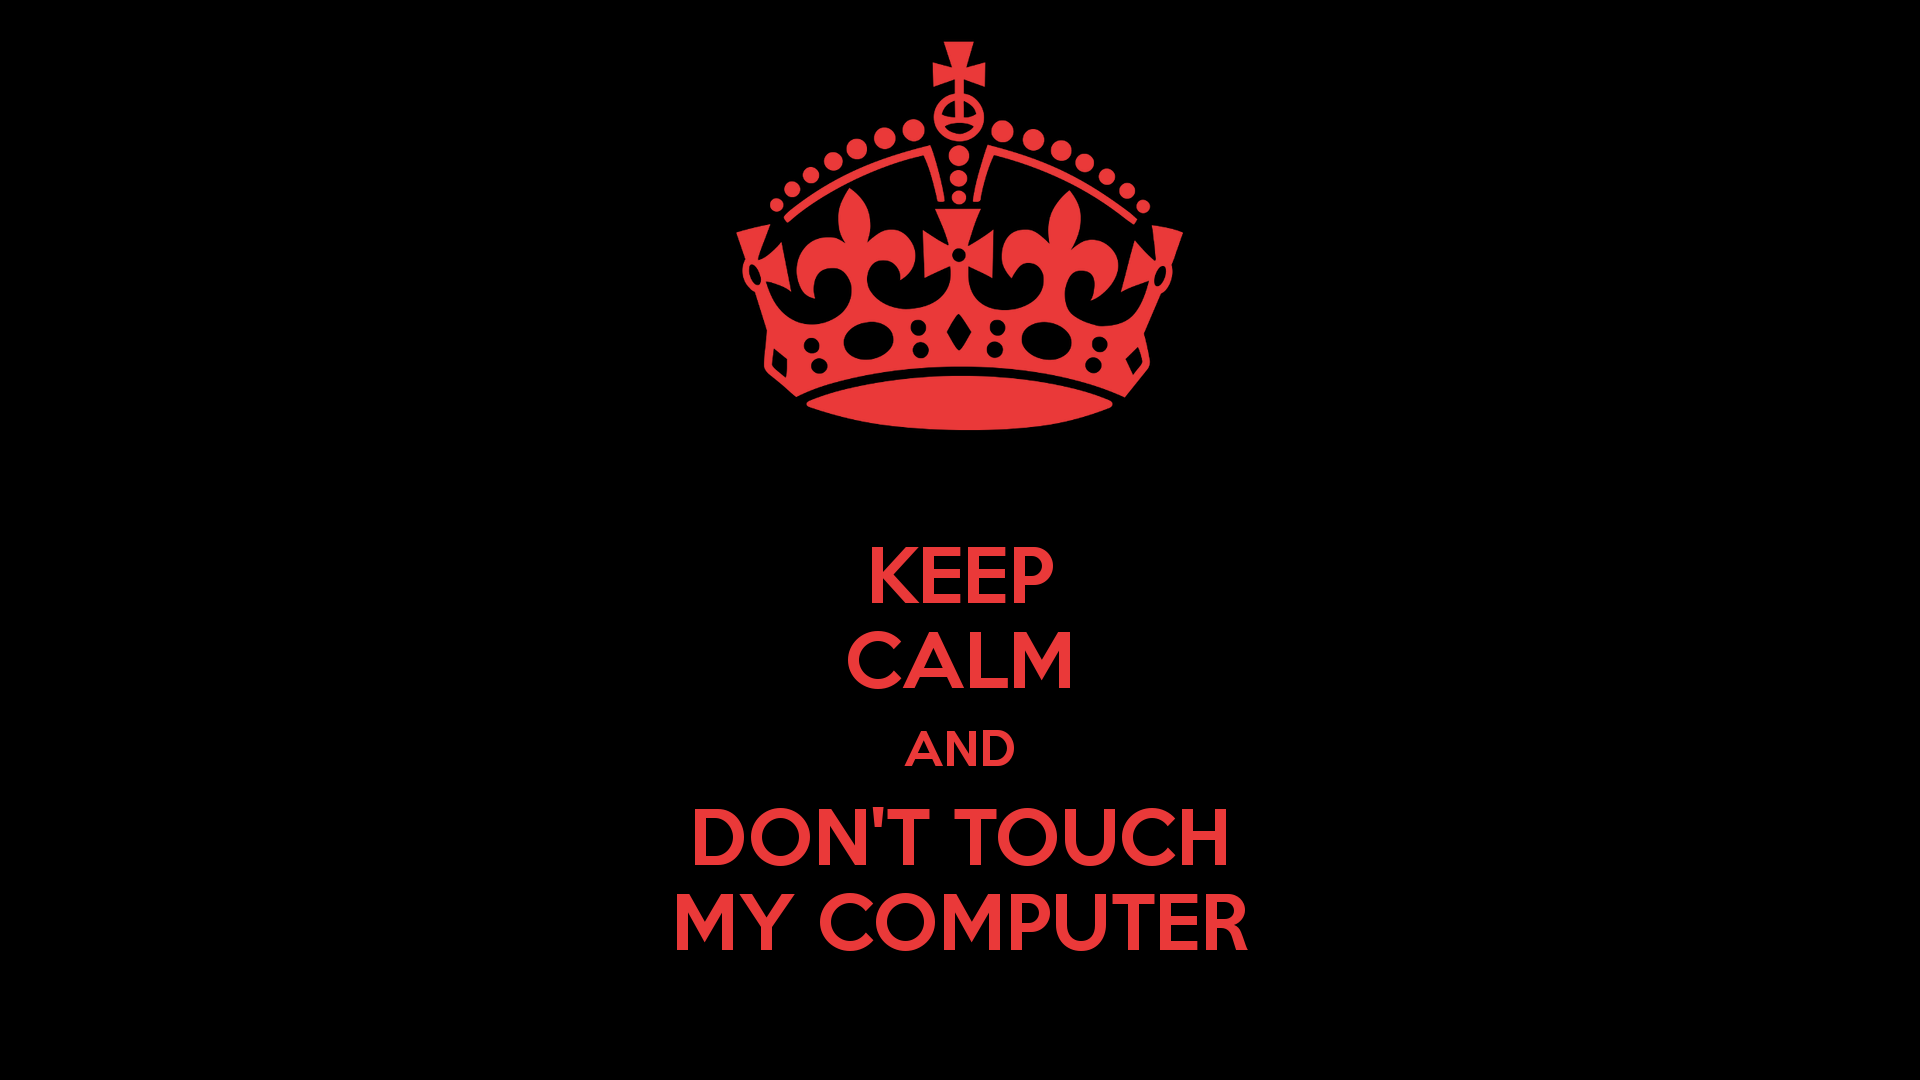 Keep Calm And Dont Touch My Computer Wallpaper. Free HD Desktop